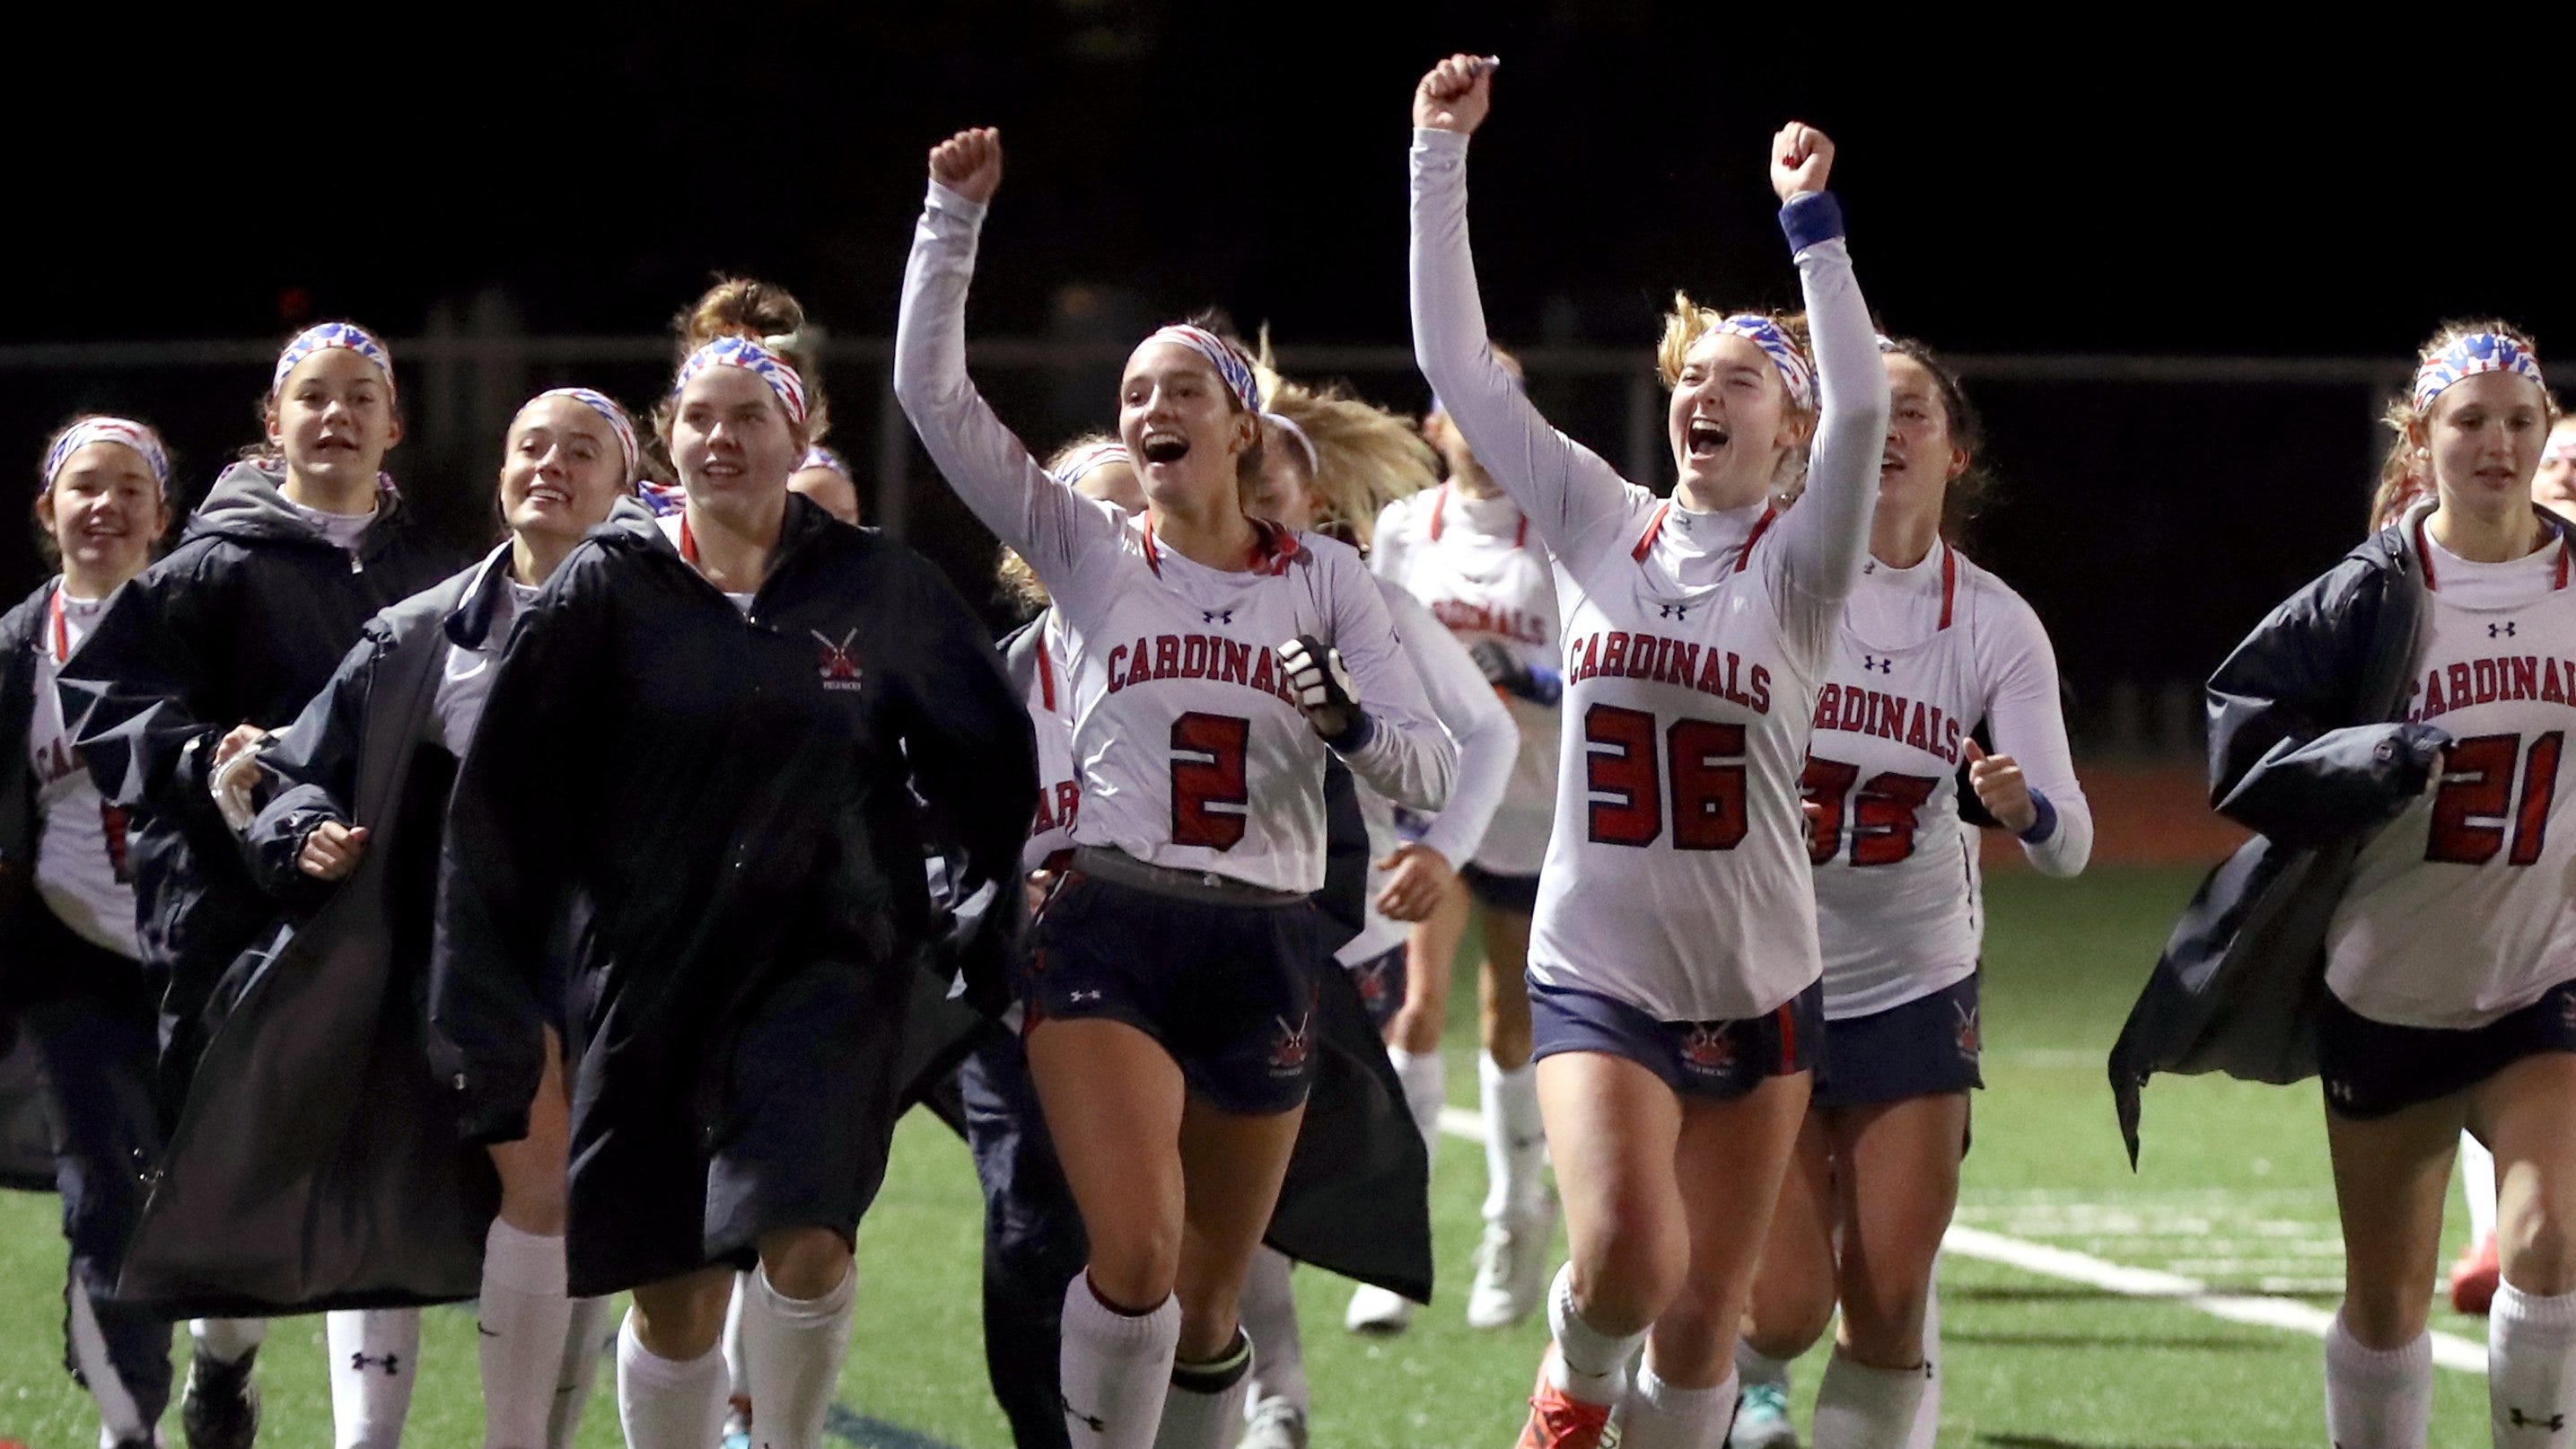 Ohio high school field hockey Who won in the state semifinals?